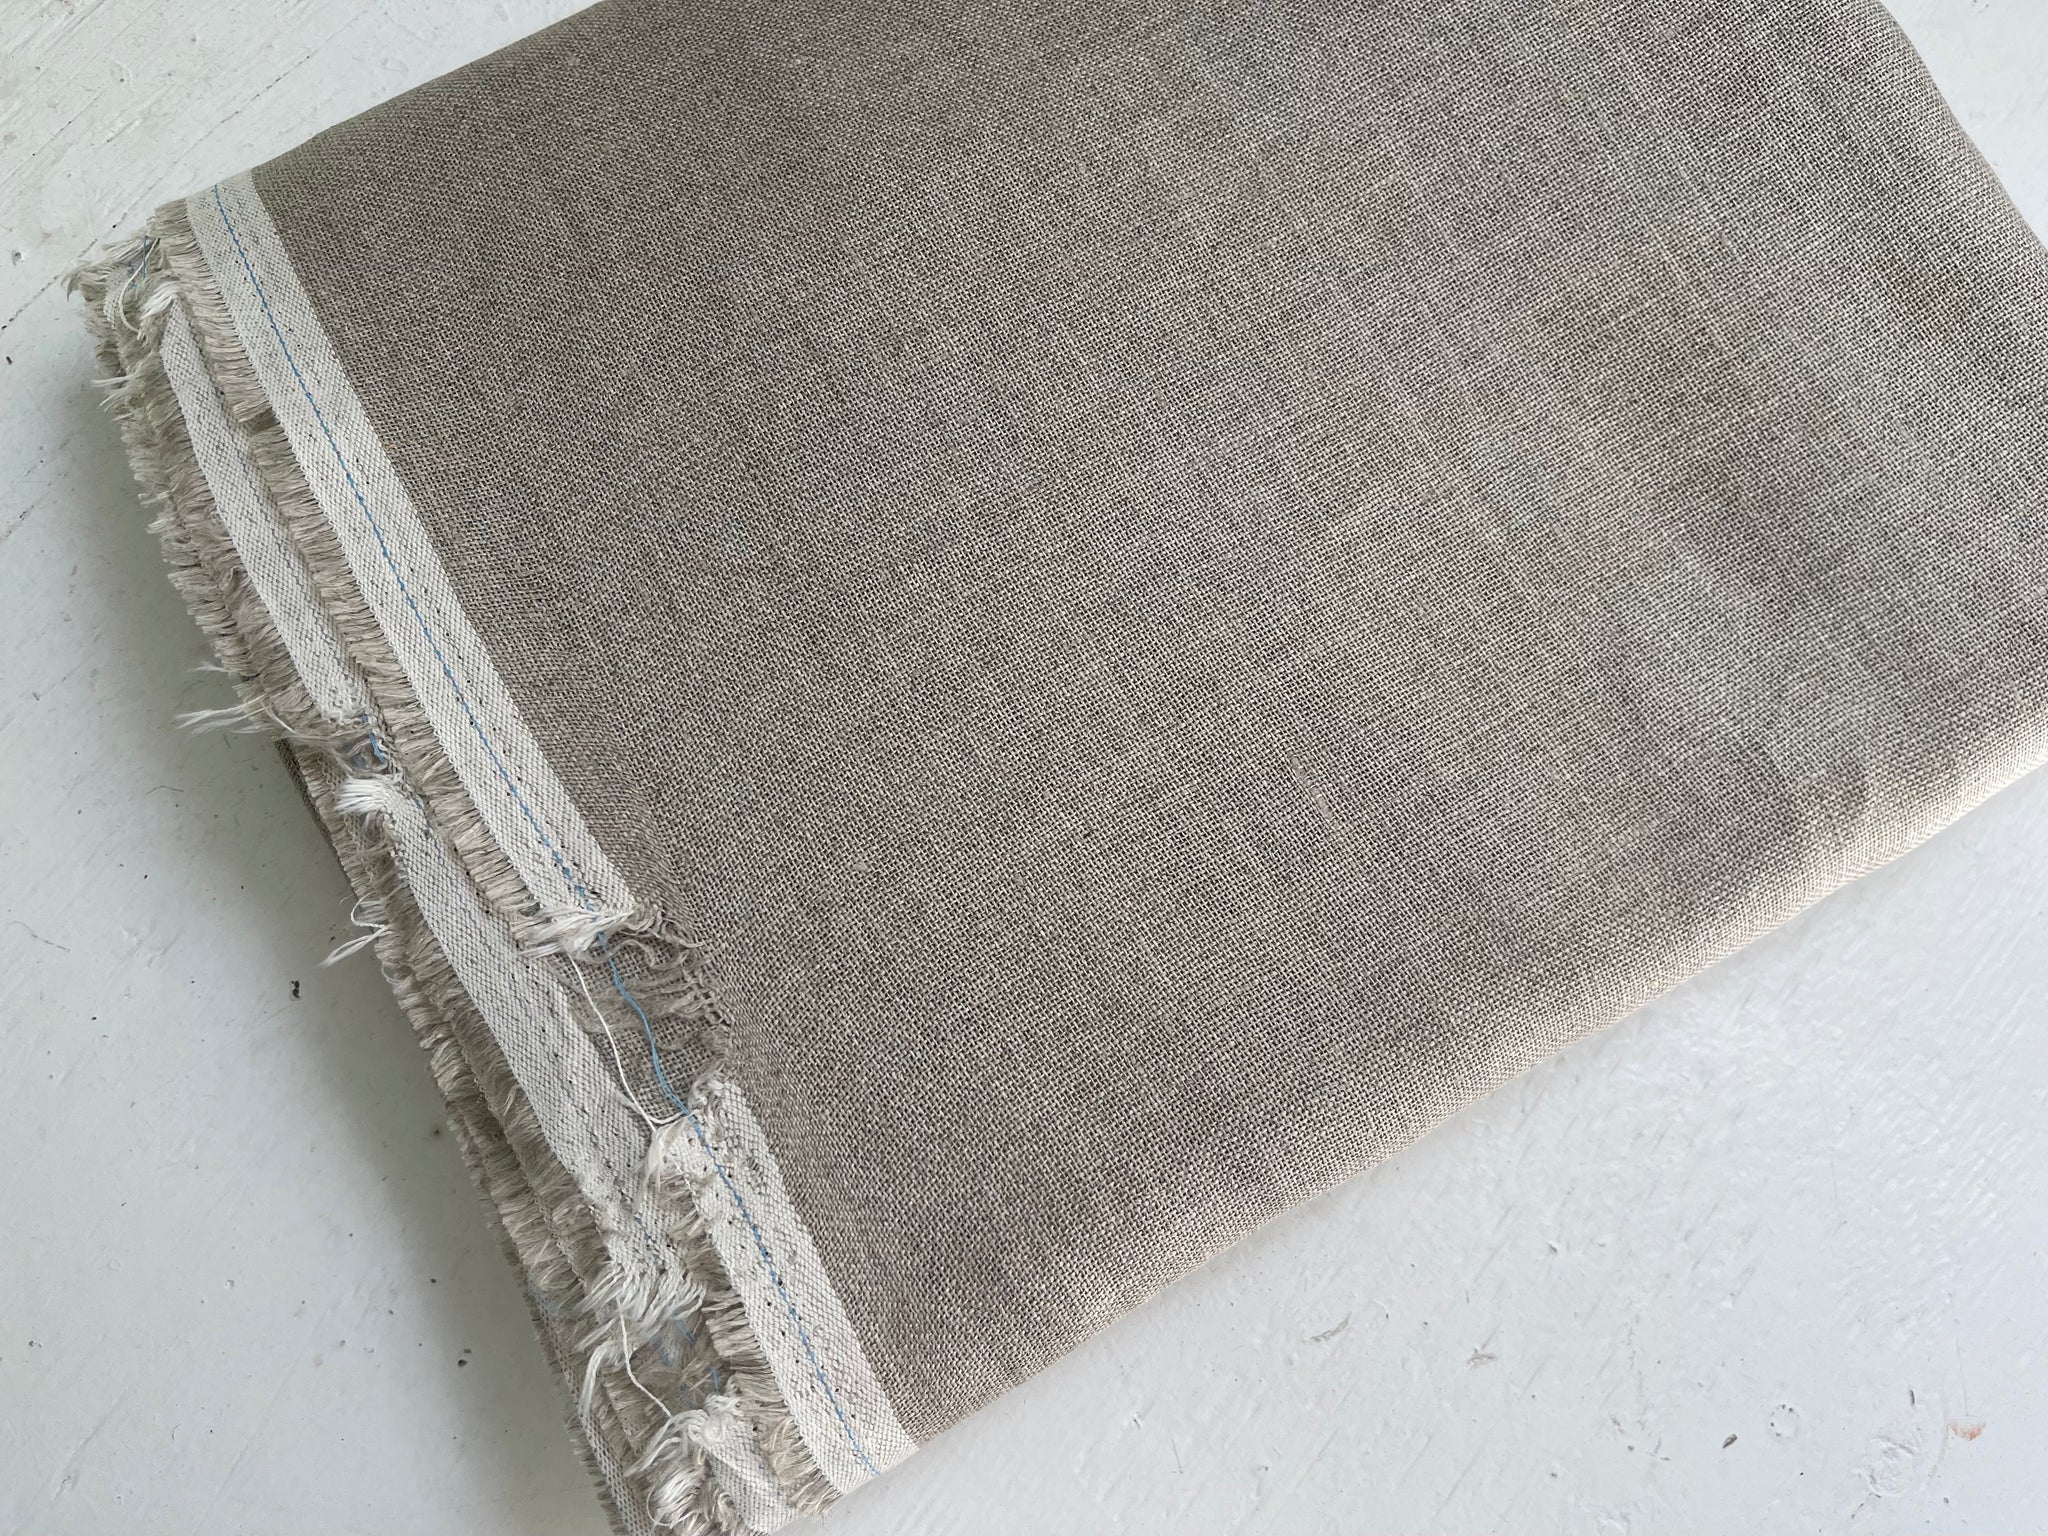 Linen Fabric Remnants - Natural Loose Weave - over 8 yards cut - small rips along selvage